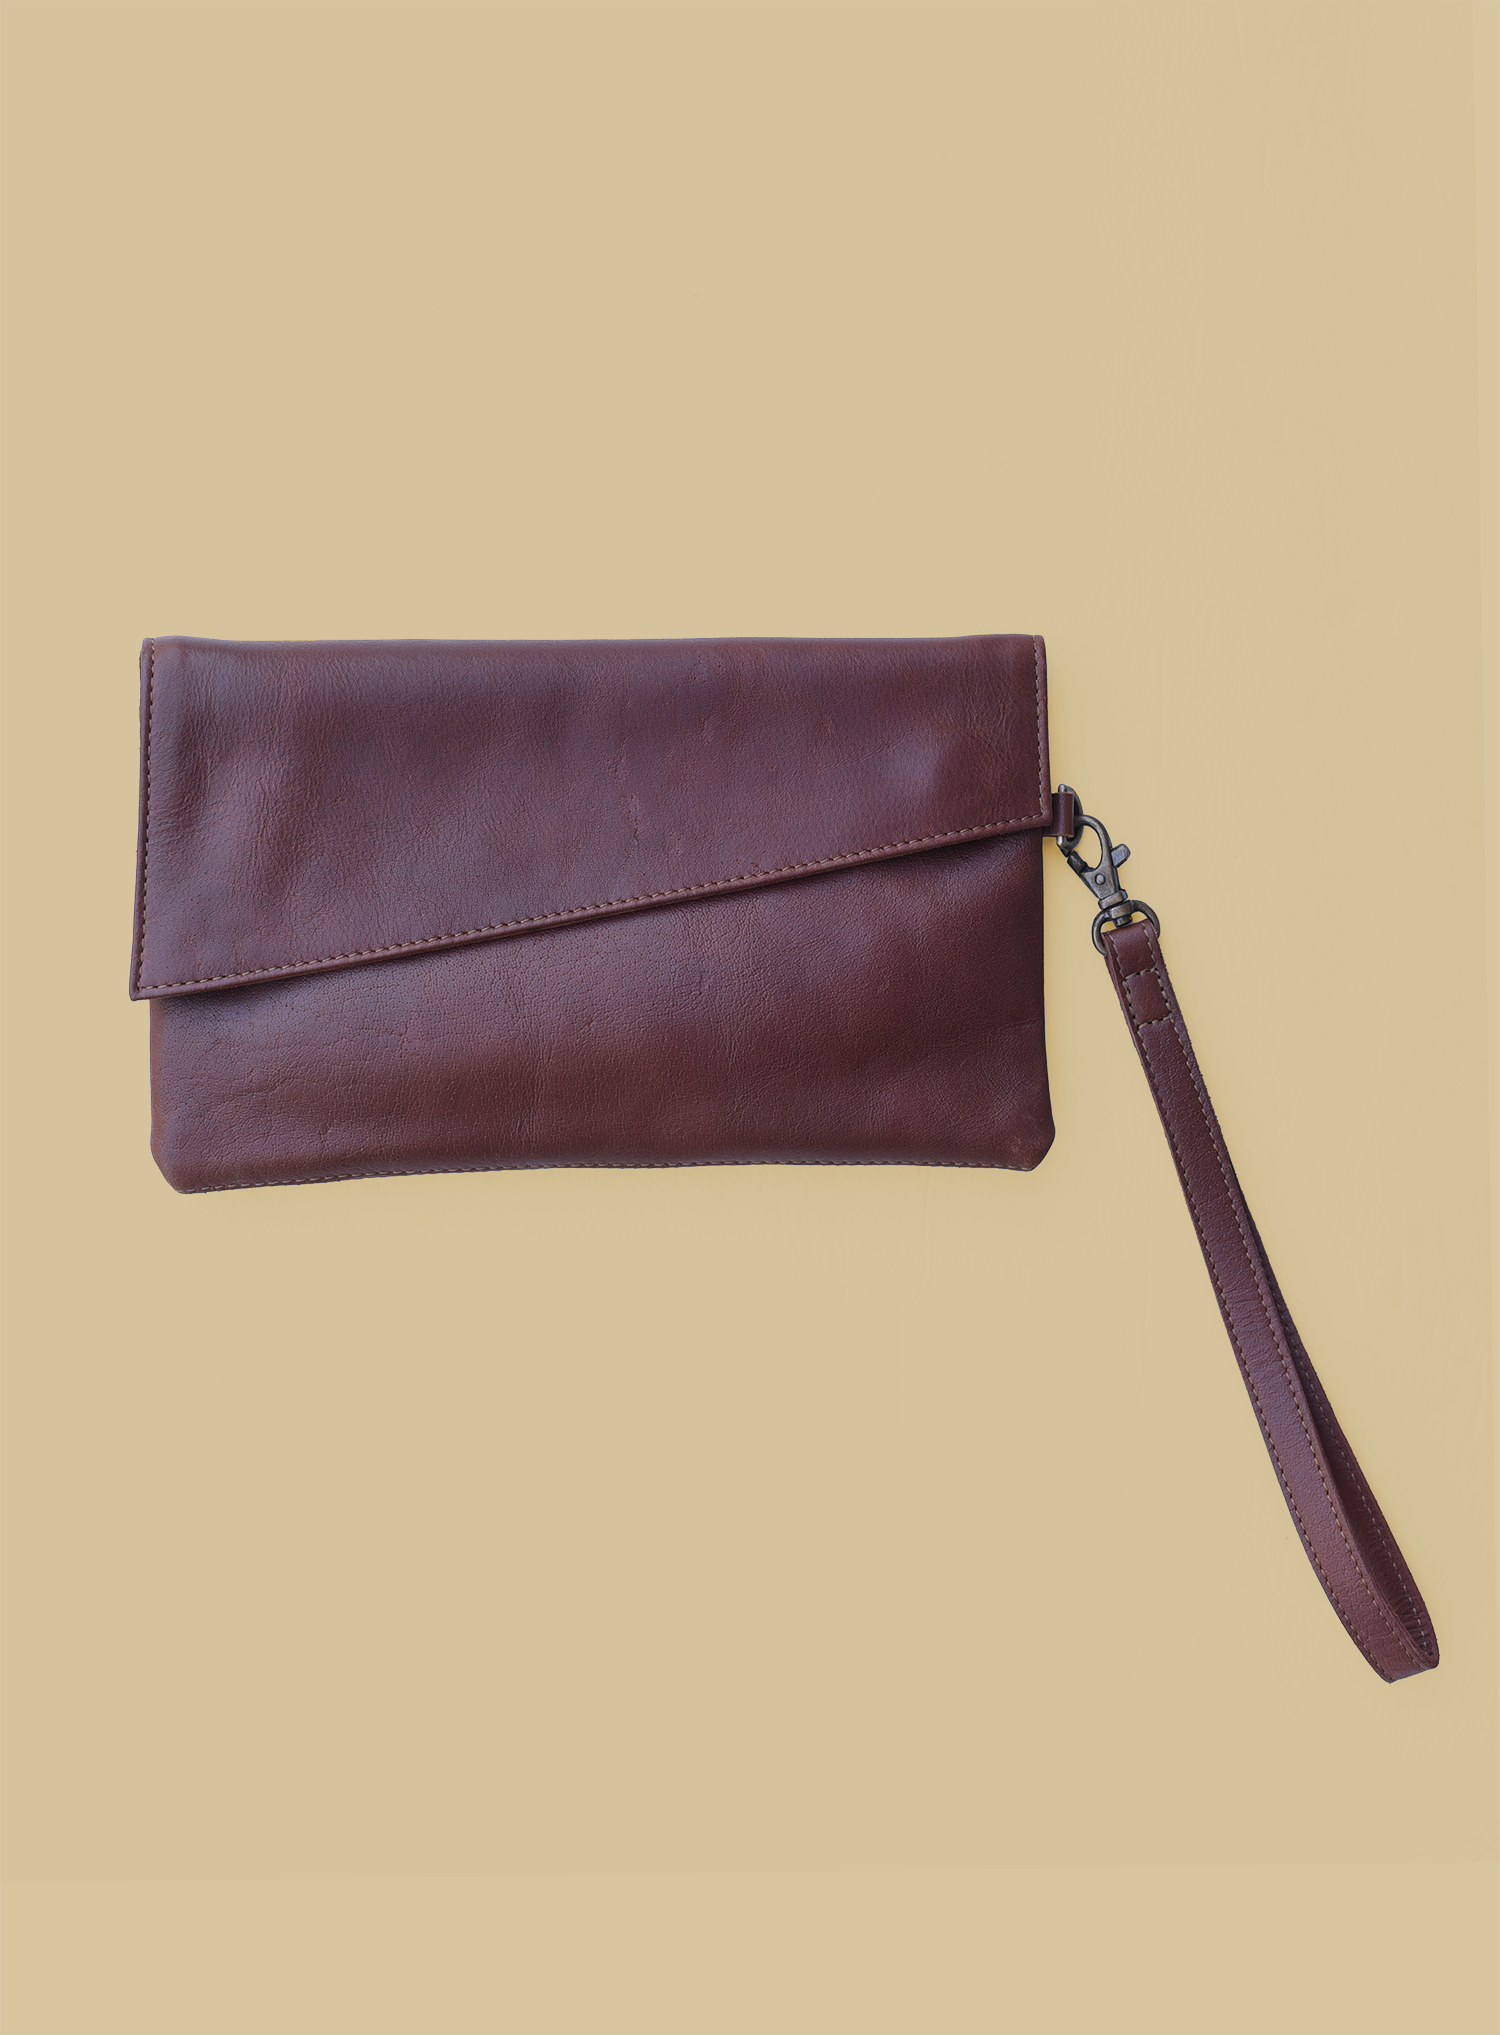 Valextra Dark Brown Iside Clutch - Ann's Fabulous Closeouts